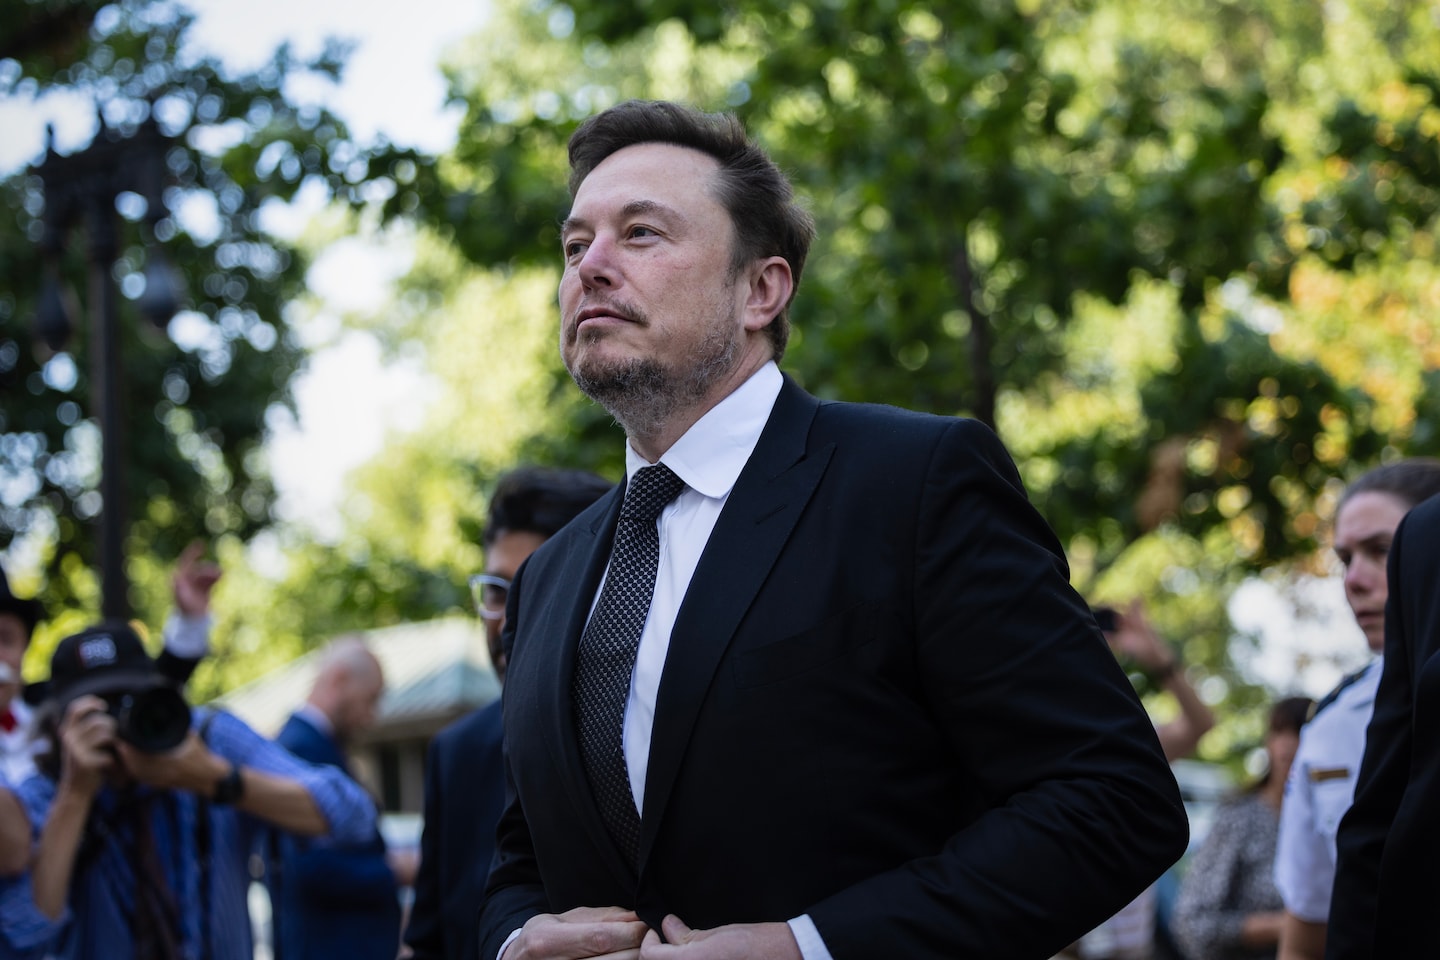 Musk expected to meet with Netanyahu as antisemitism controversy rages